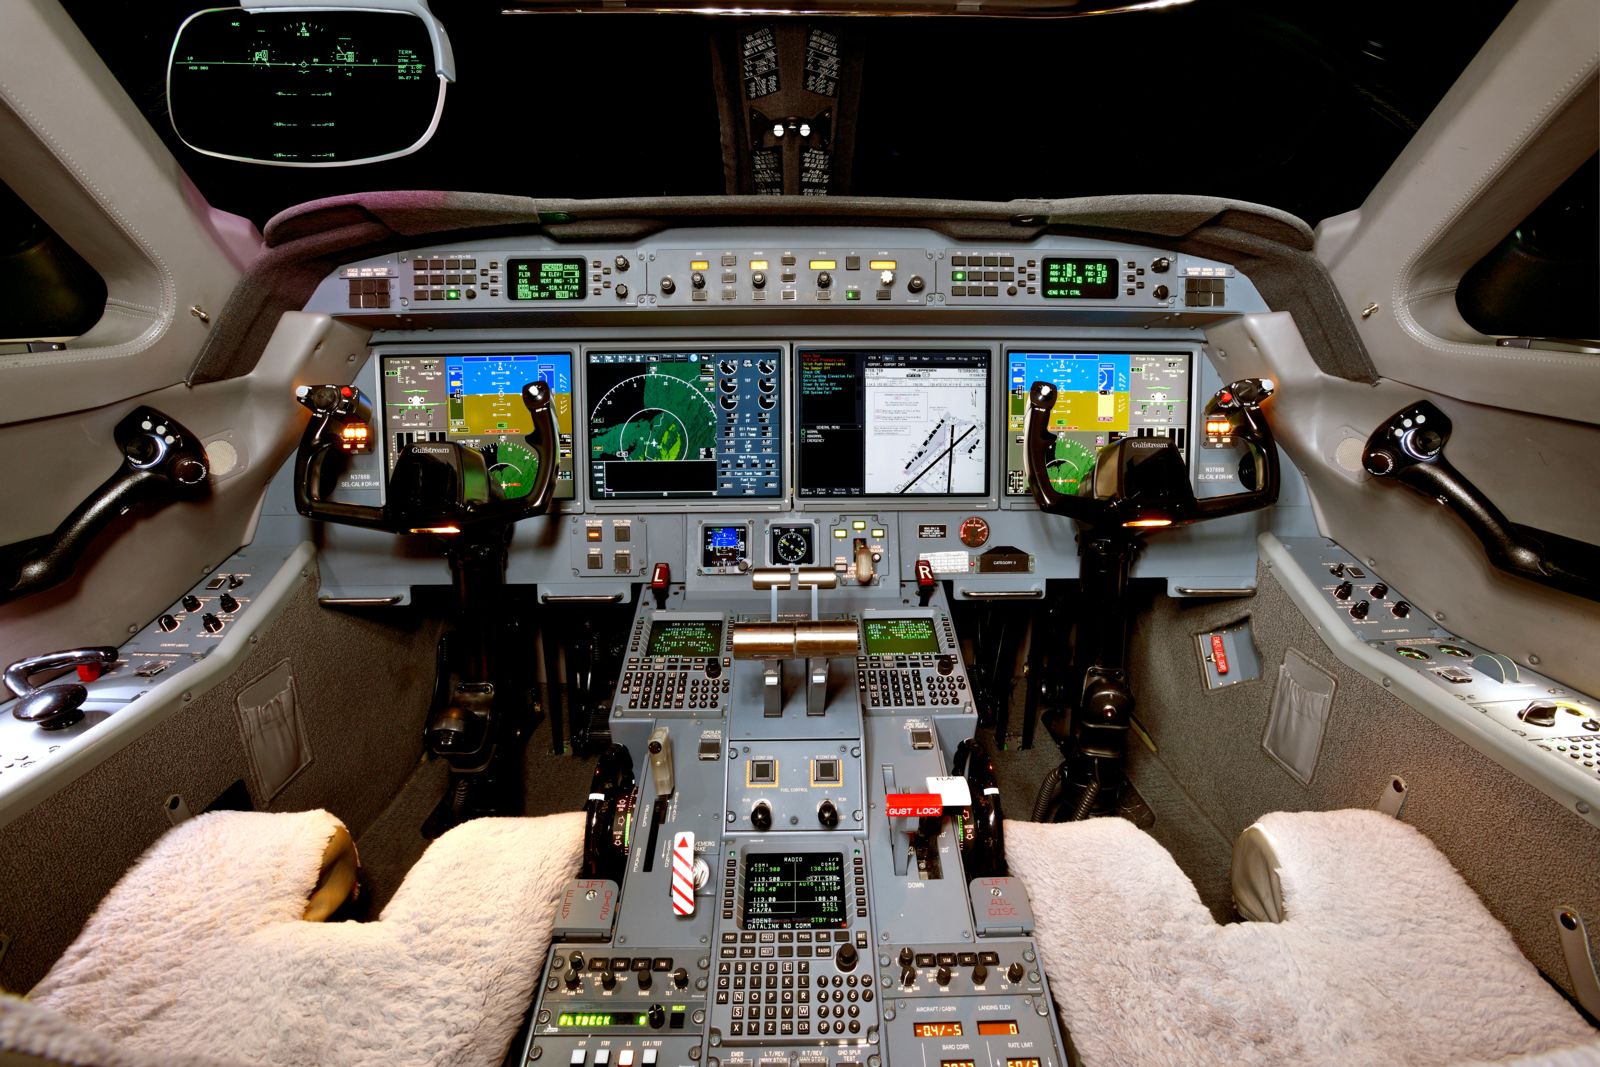 Gulfstream G550  S/N 5389 for sale | gallery image: /userfiles/images/G550_SN5389/cockpit.jpg